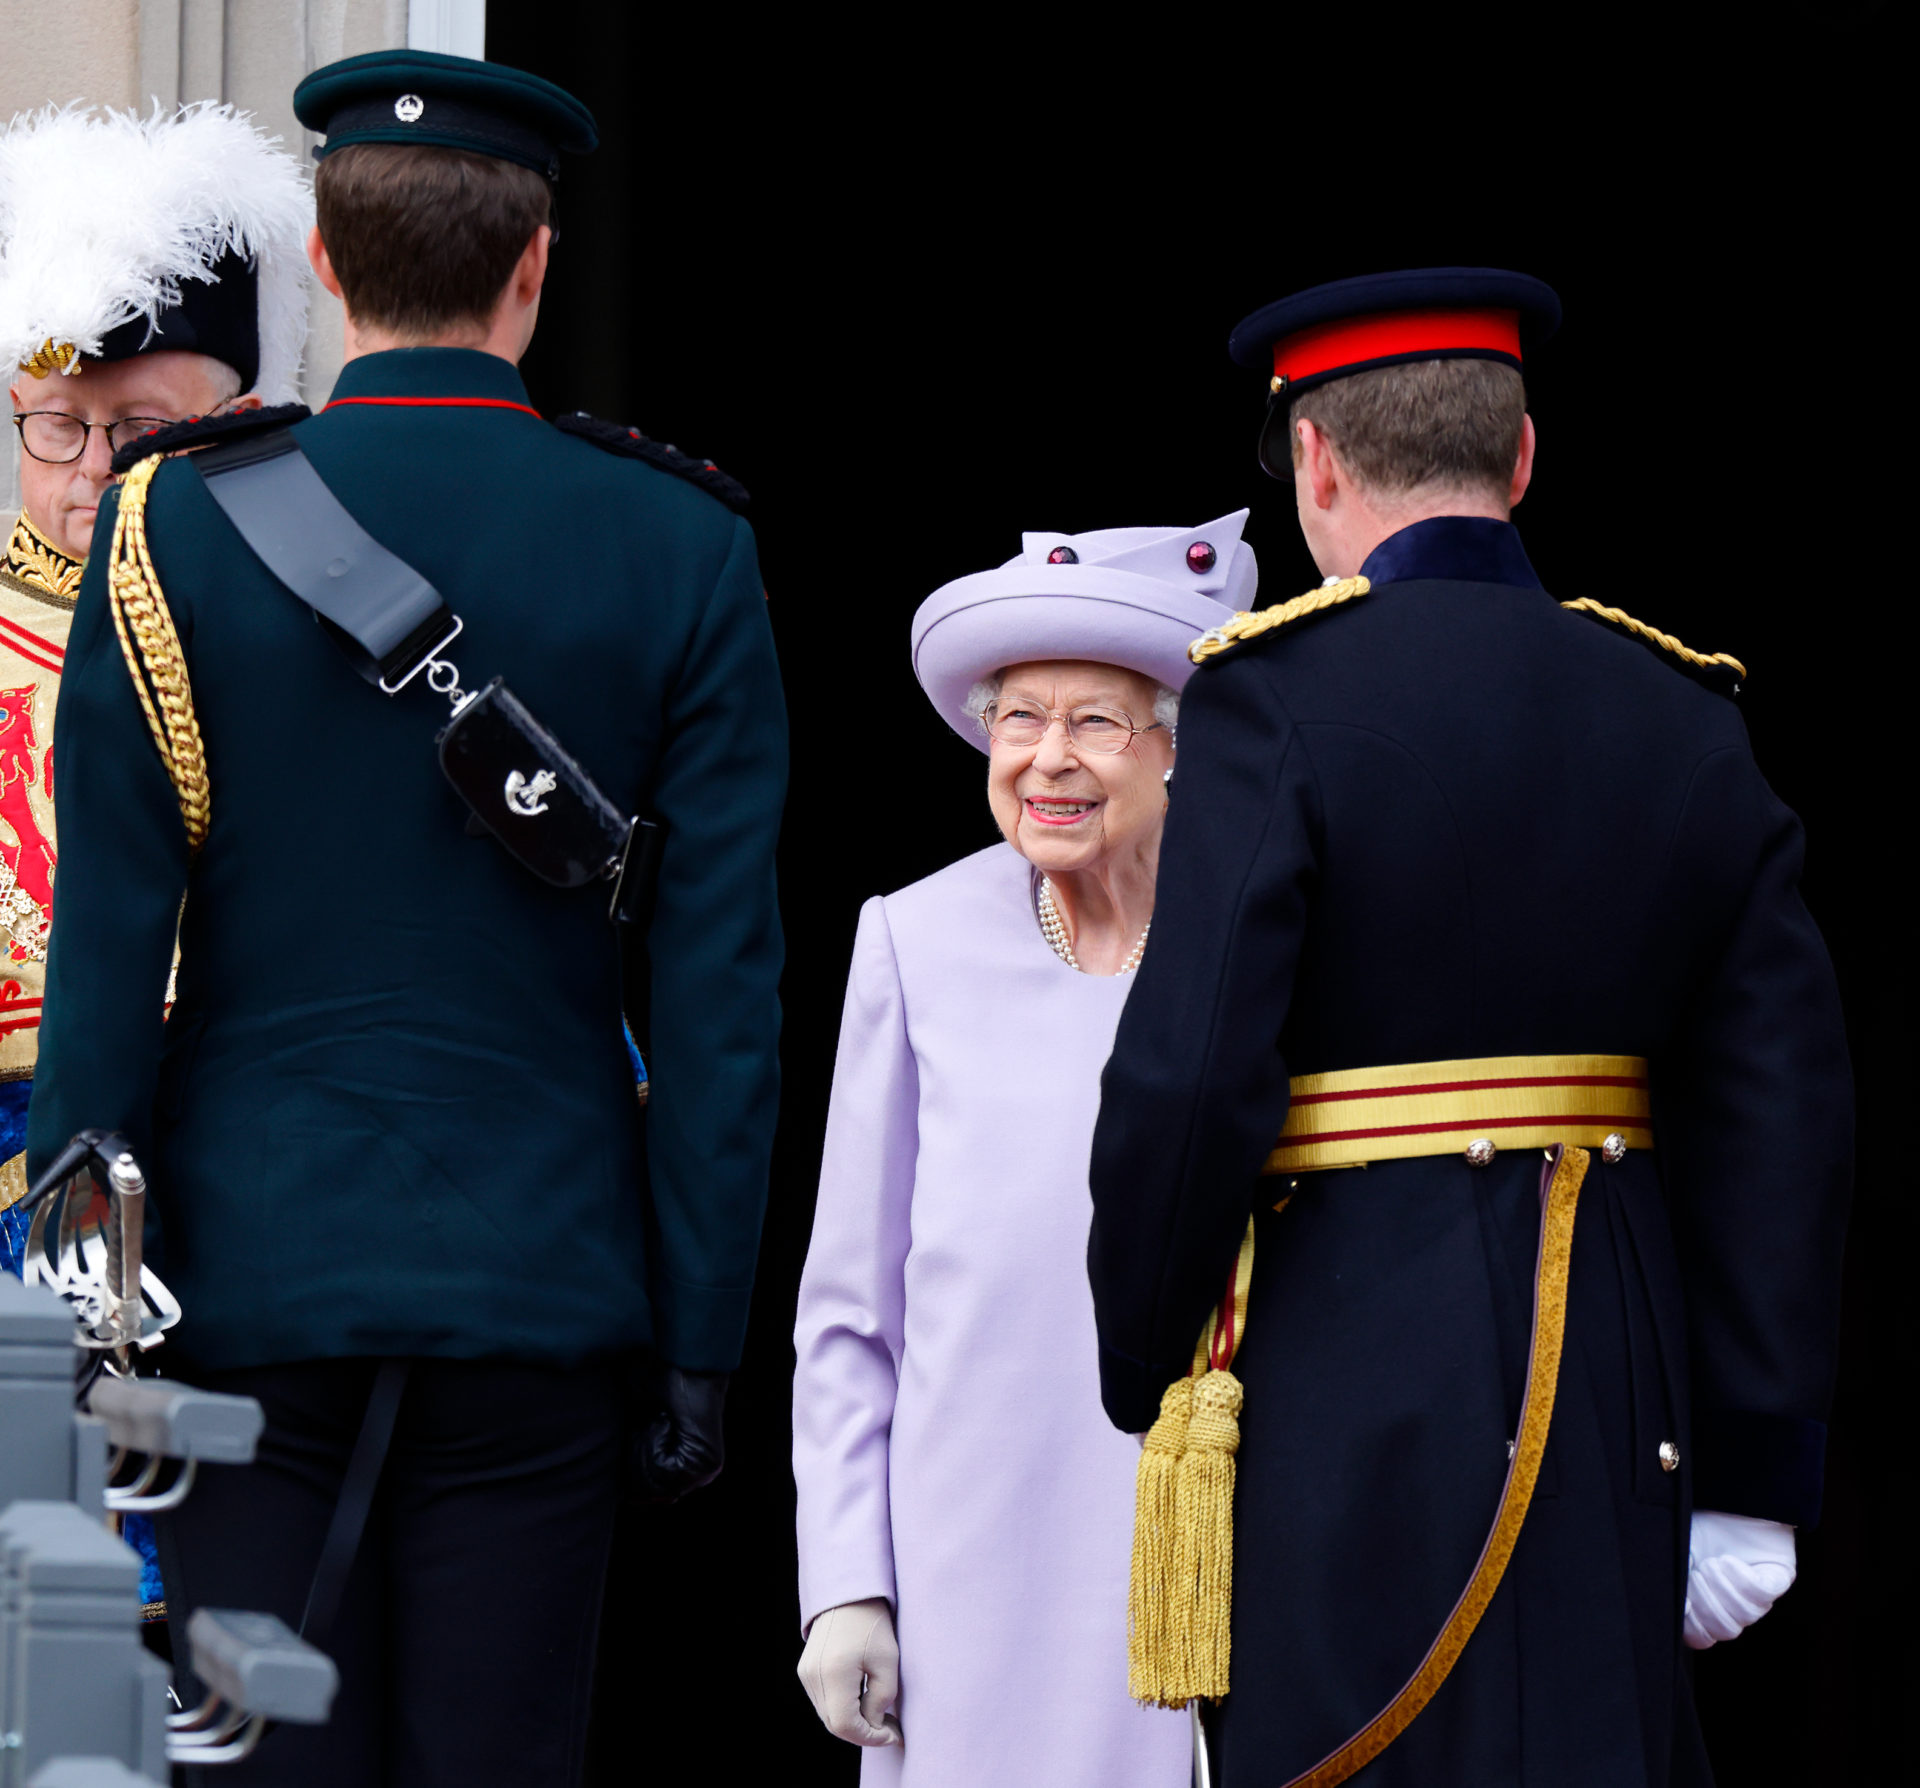 The Royal Family Visit Scotland - Armed Forces Act Of Loyalty Parade